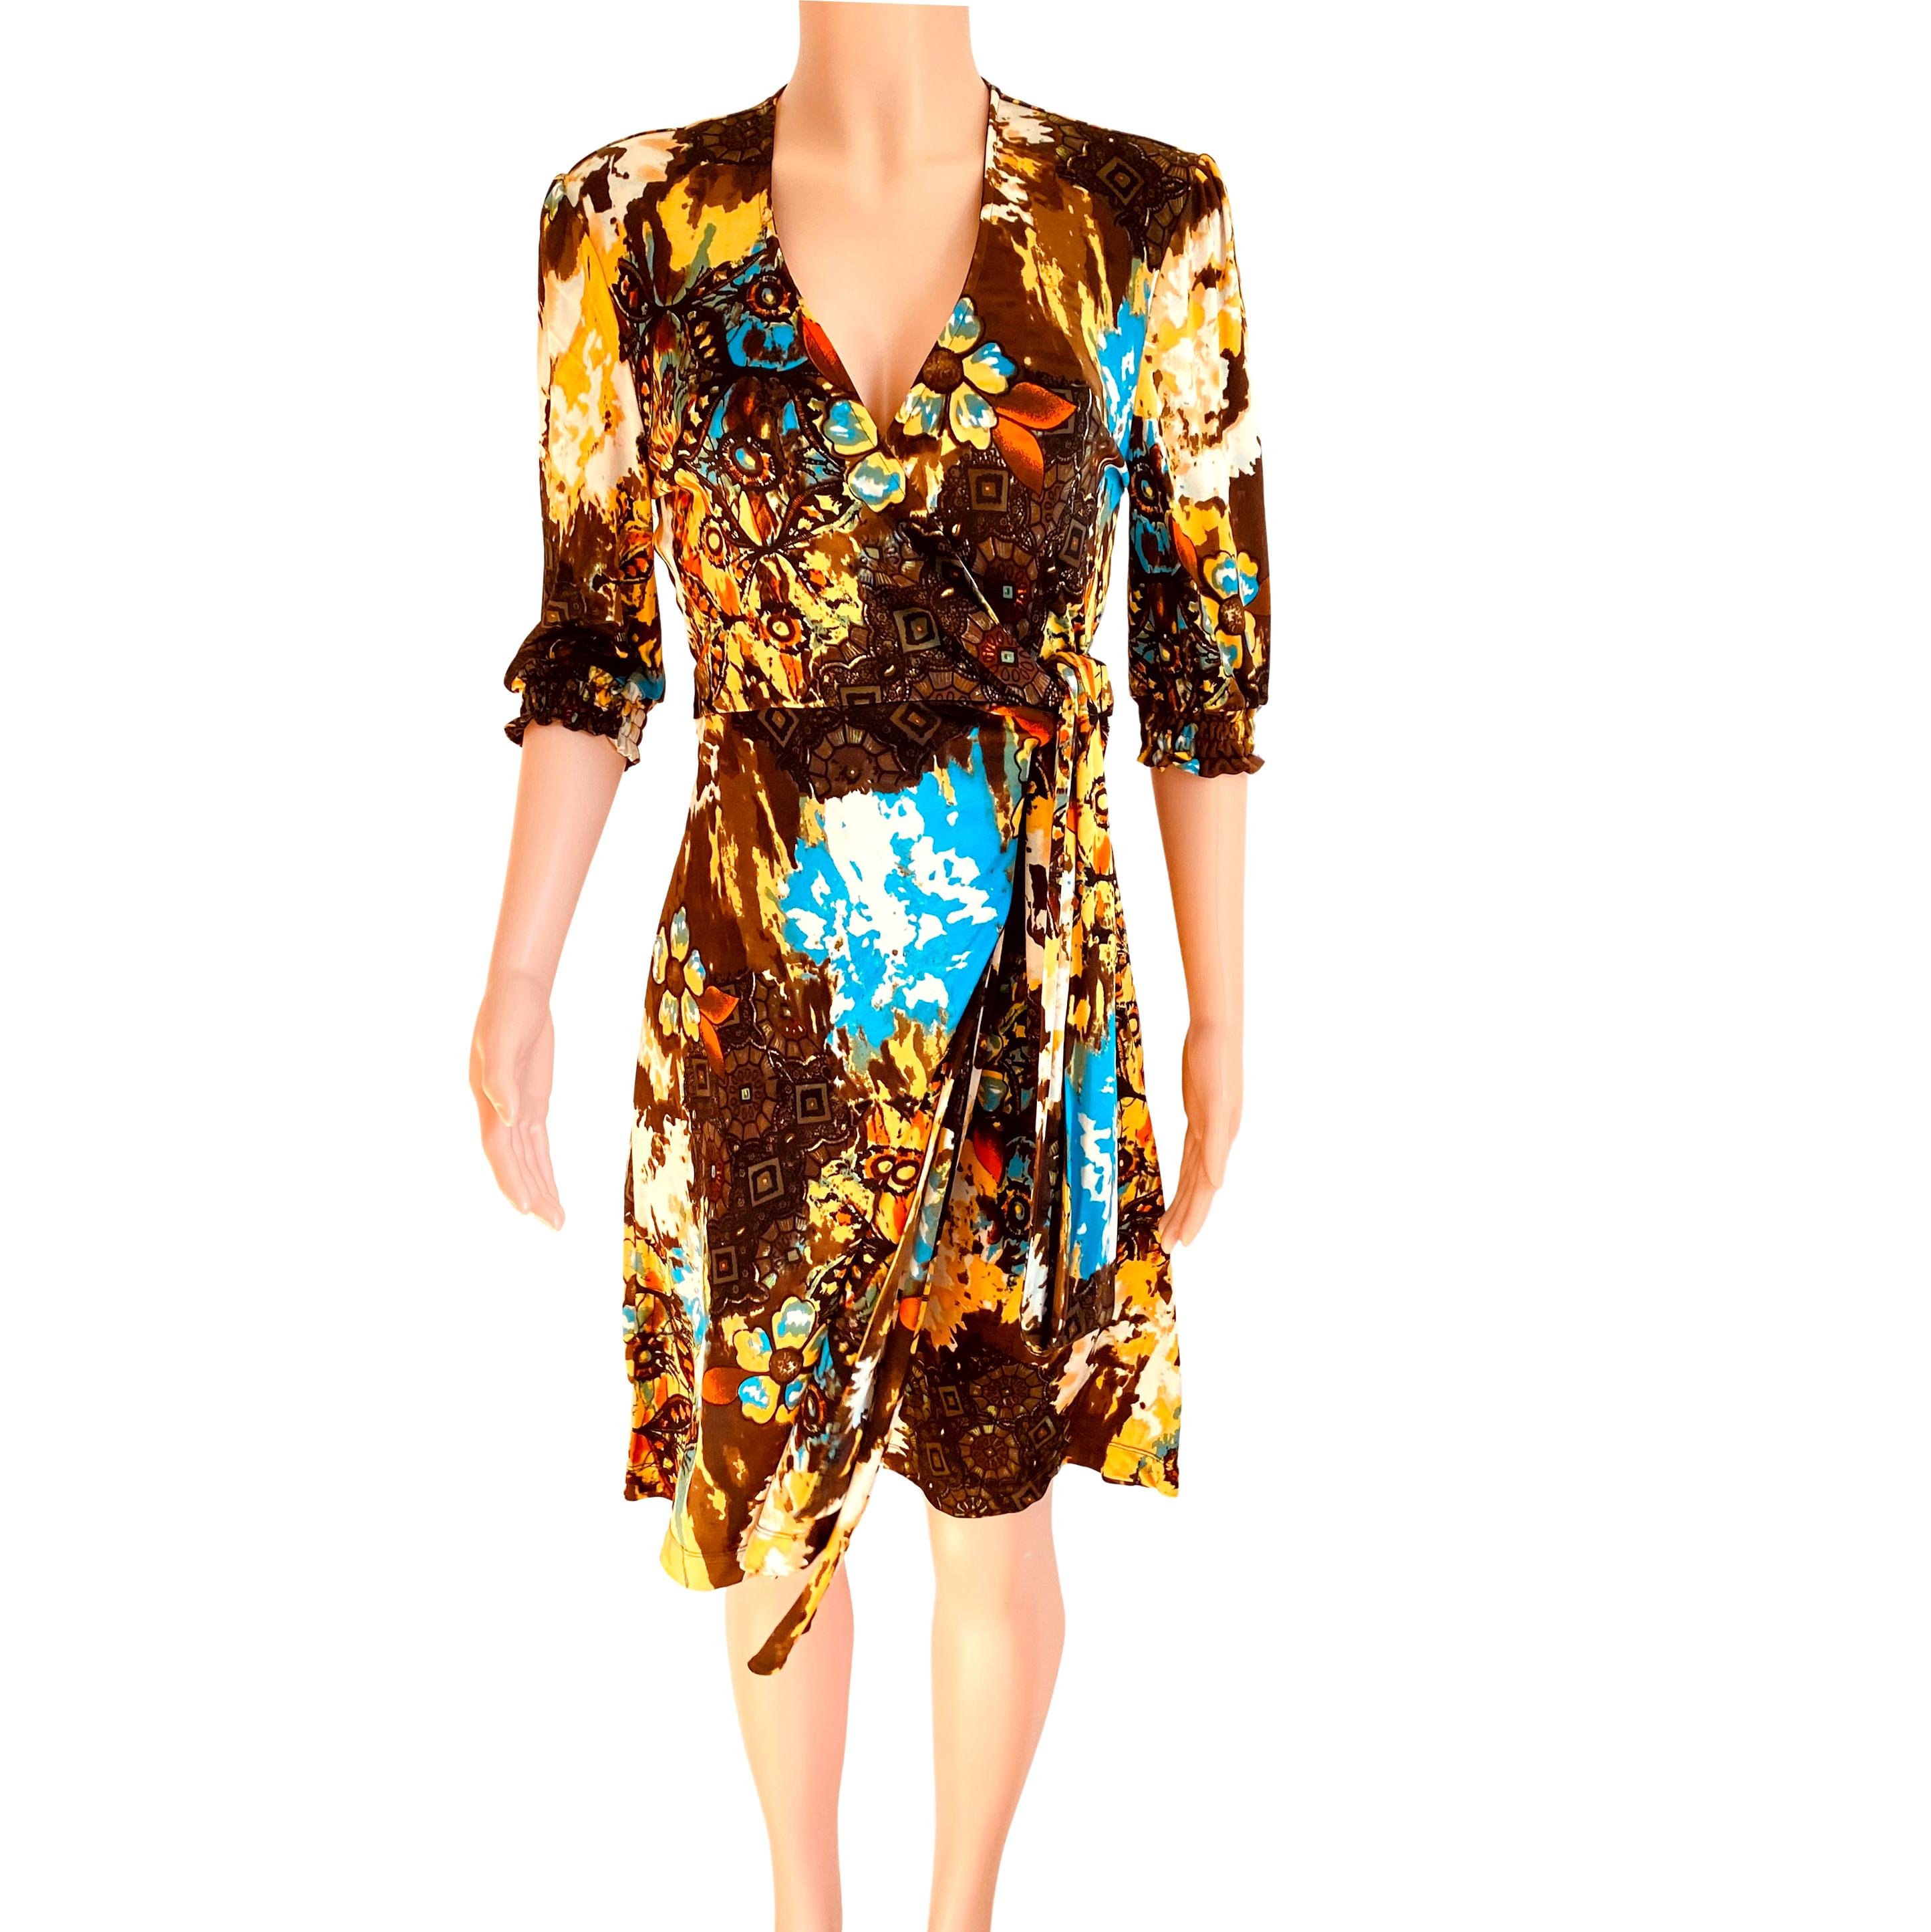 True wrap dress with A-line skirt and mid-length gentle puff sleeves. 
Print: Archaic print in yellow, brown, white and a touch of sky blue.
FLORA KUNG silk dresses are made in premiere quality, long-filament silk yarn which gives a natural